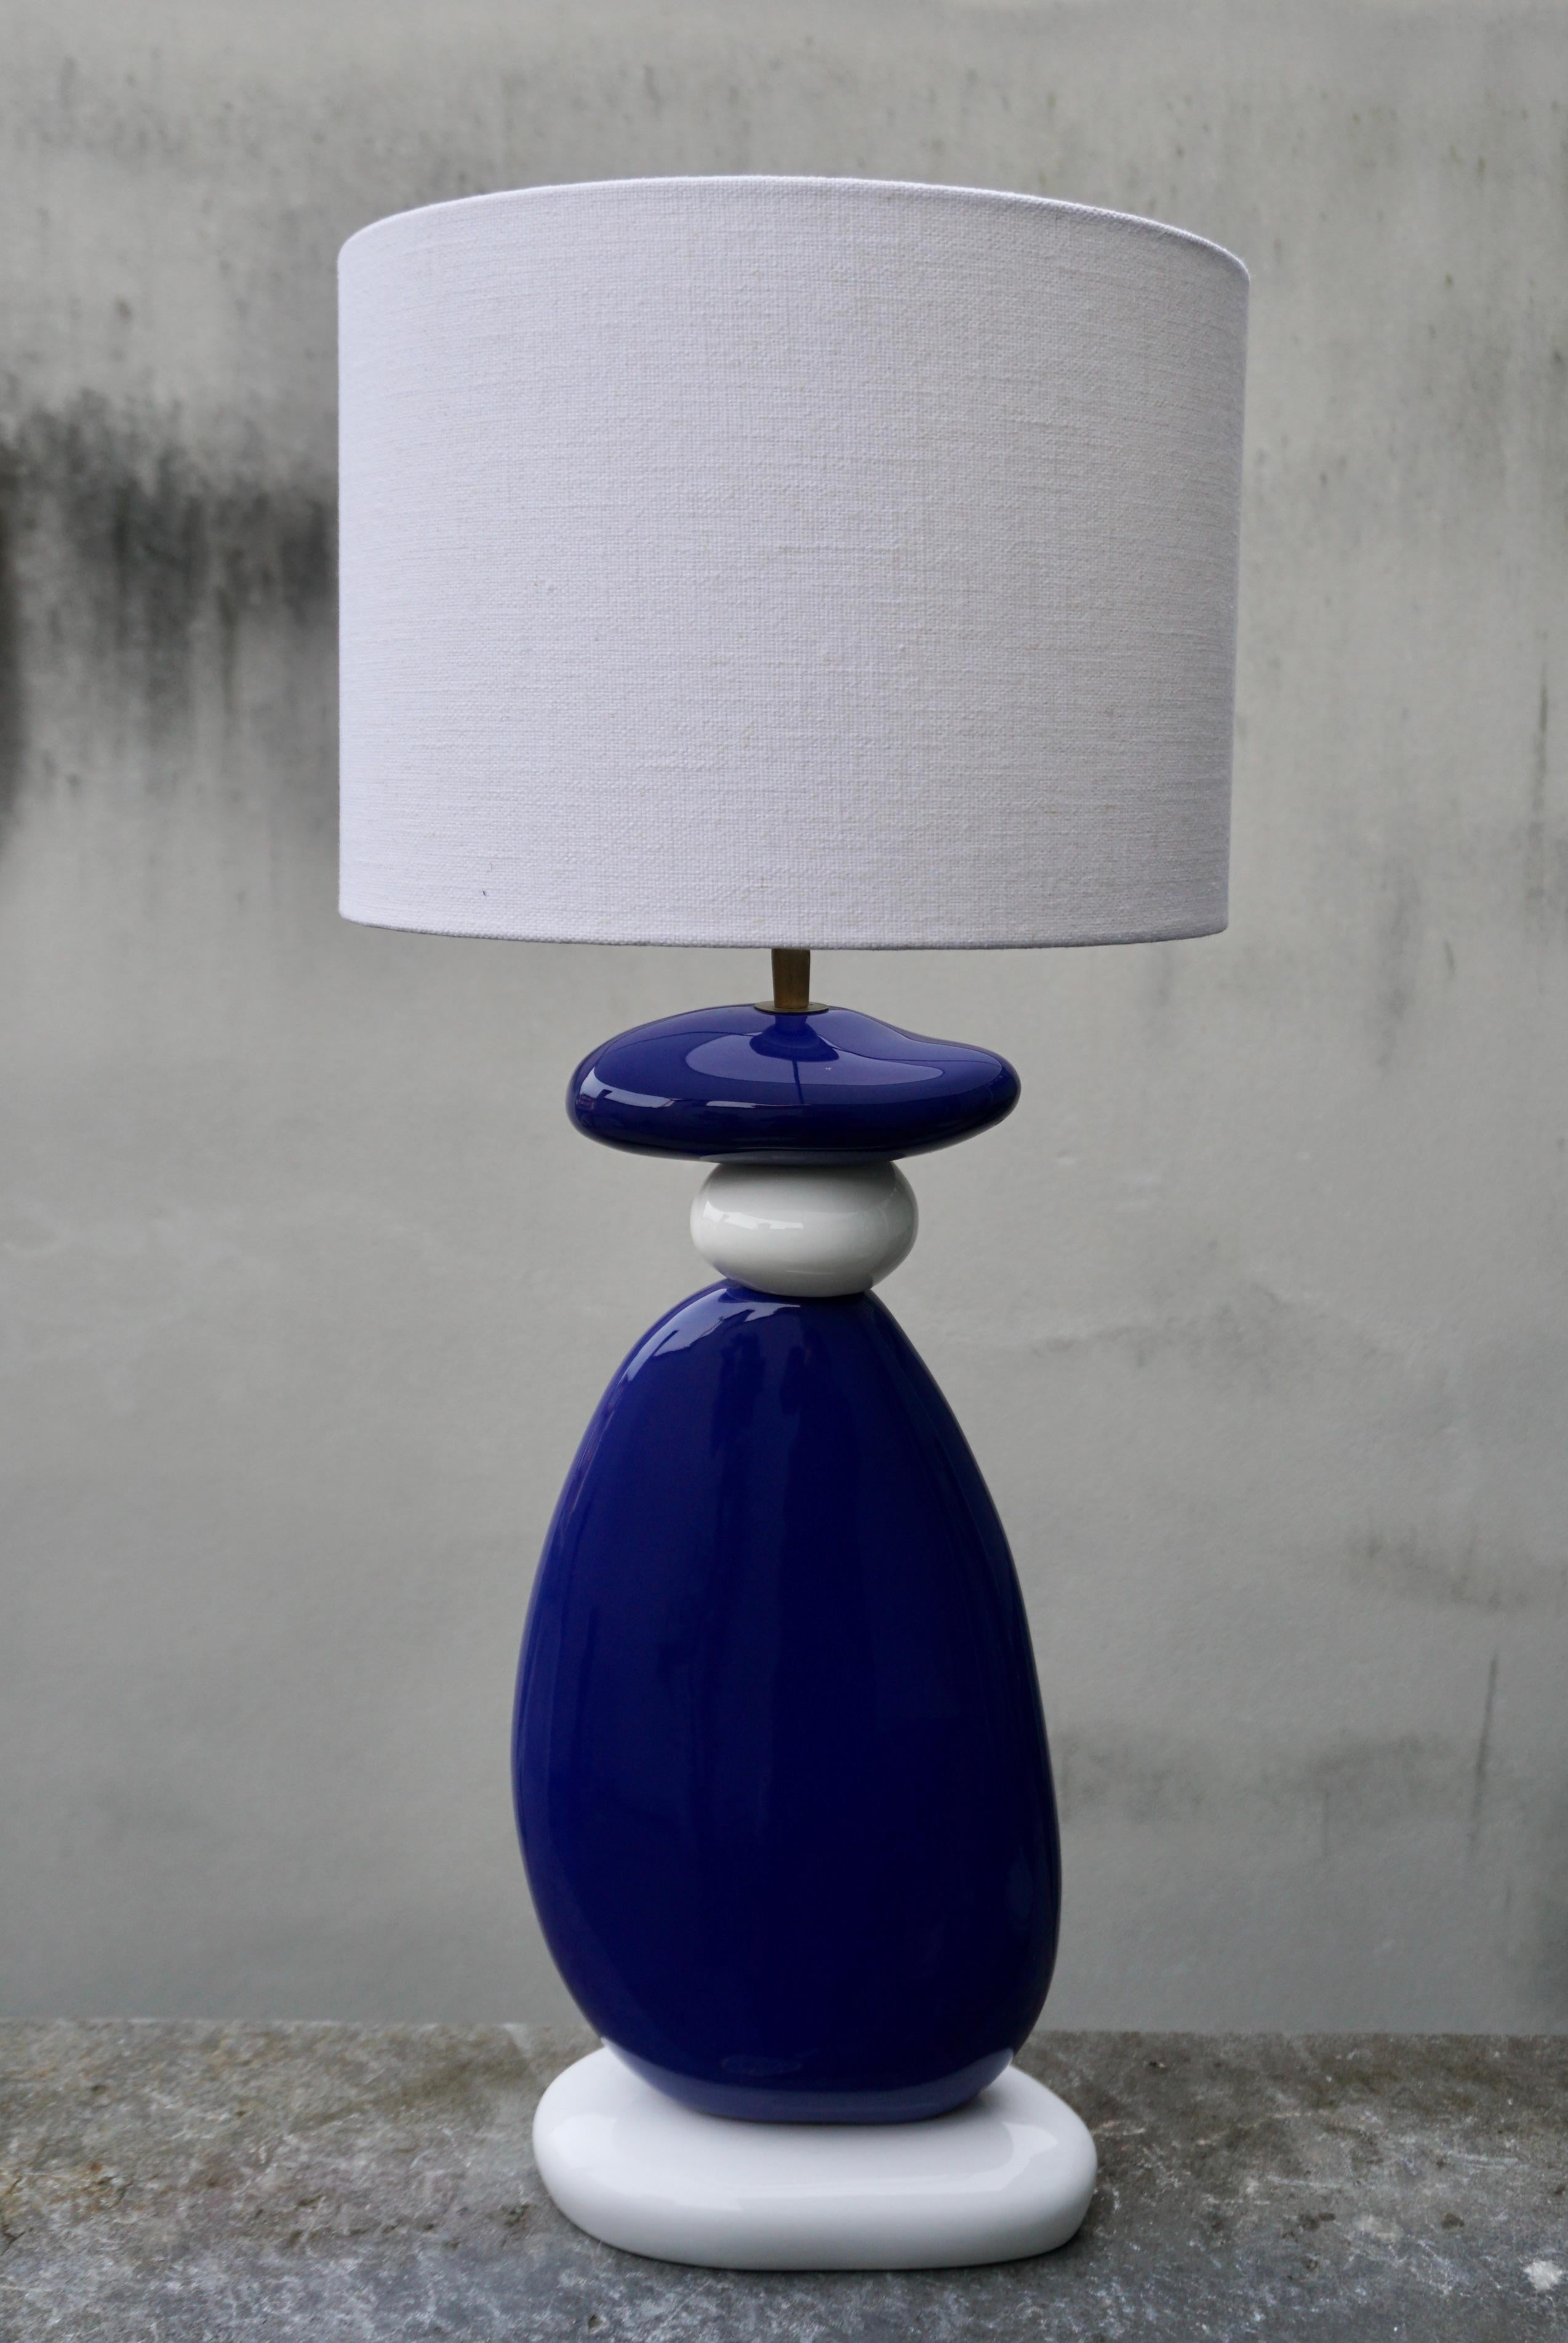 Colorful blue and white French ceramic table lamp with irregularly shaped stacked spheres by Francois Chatain.
France, circa 1970s 
Including shade.